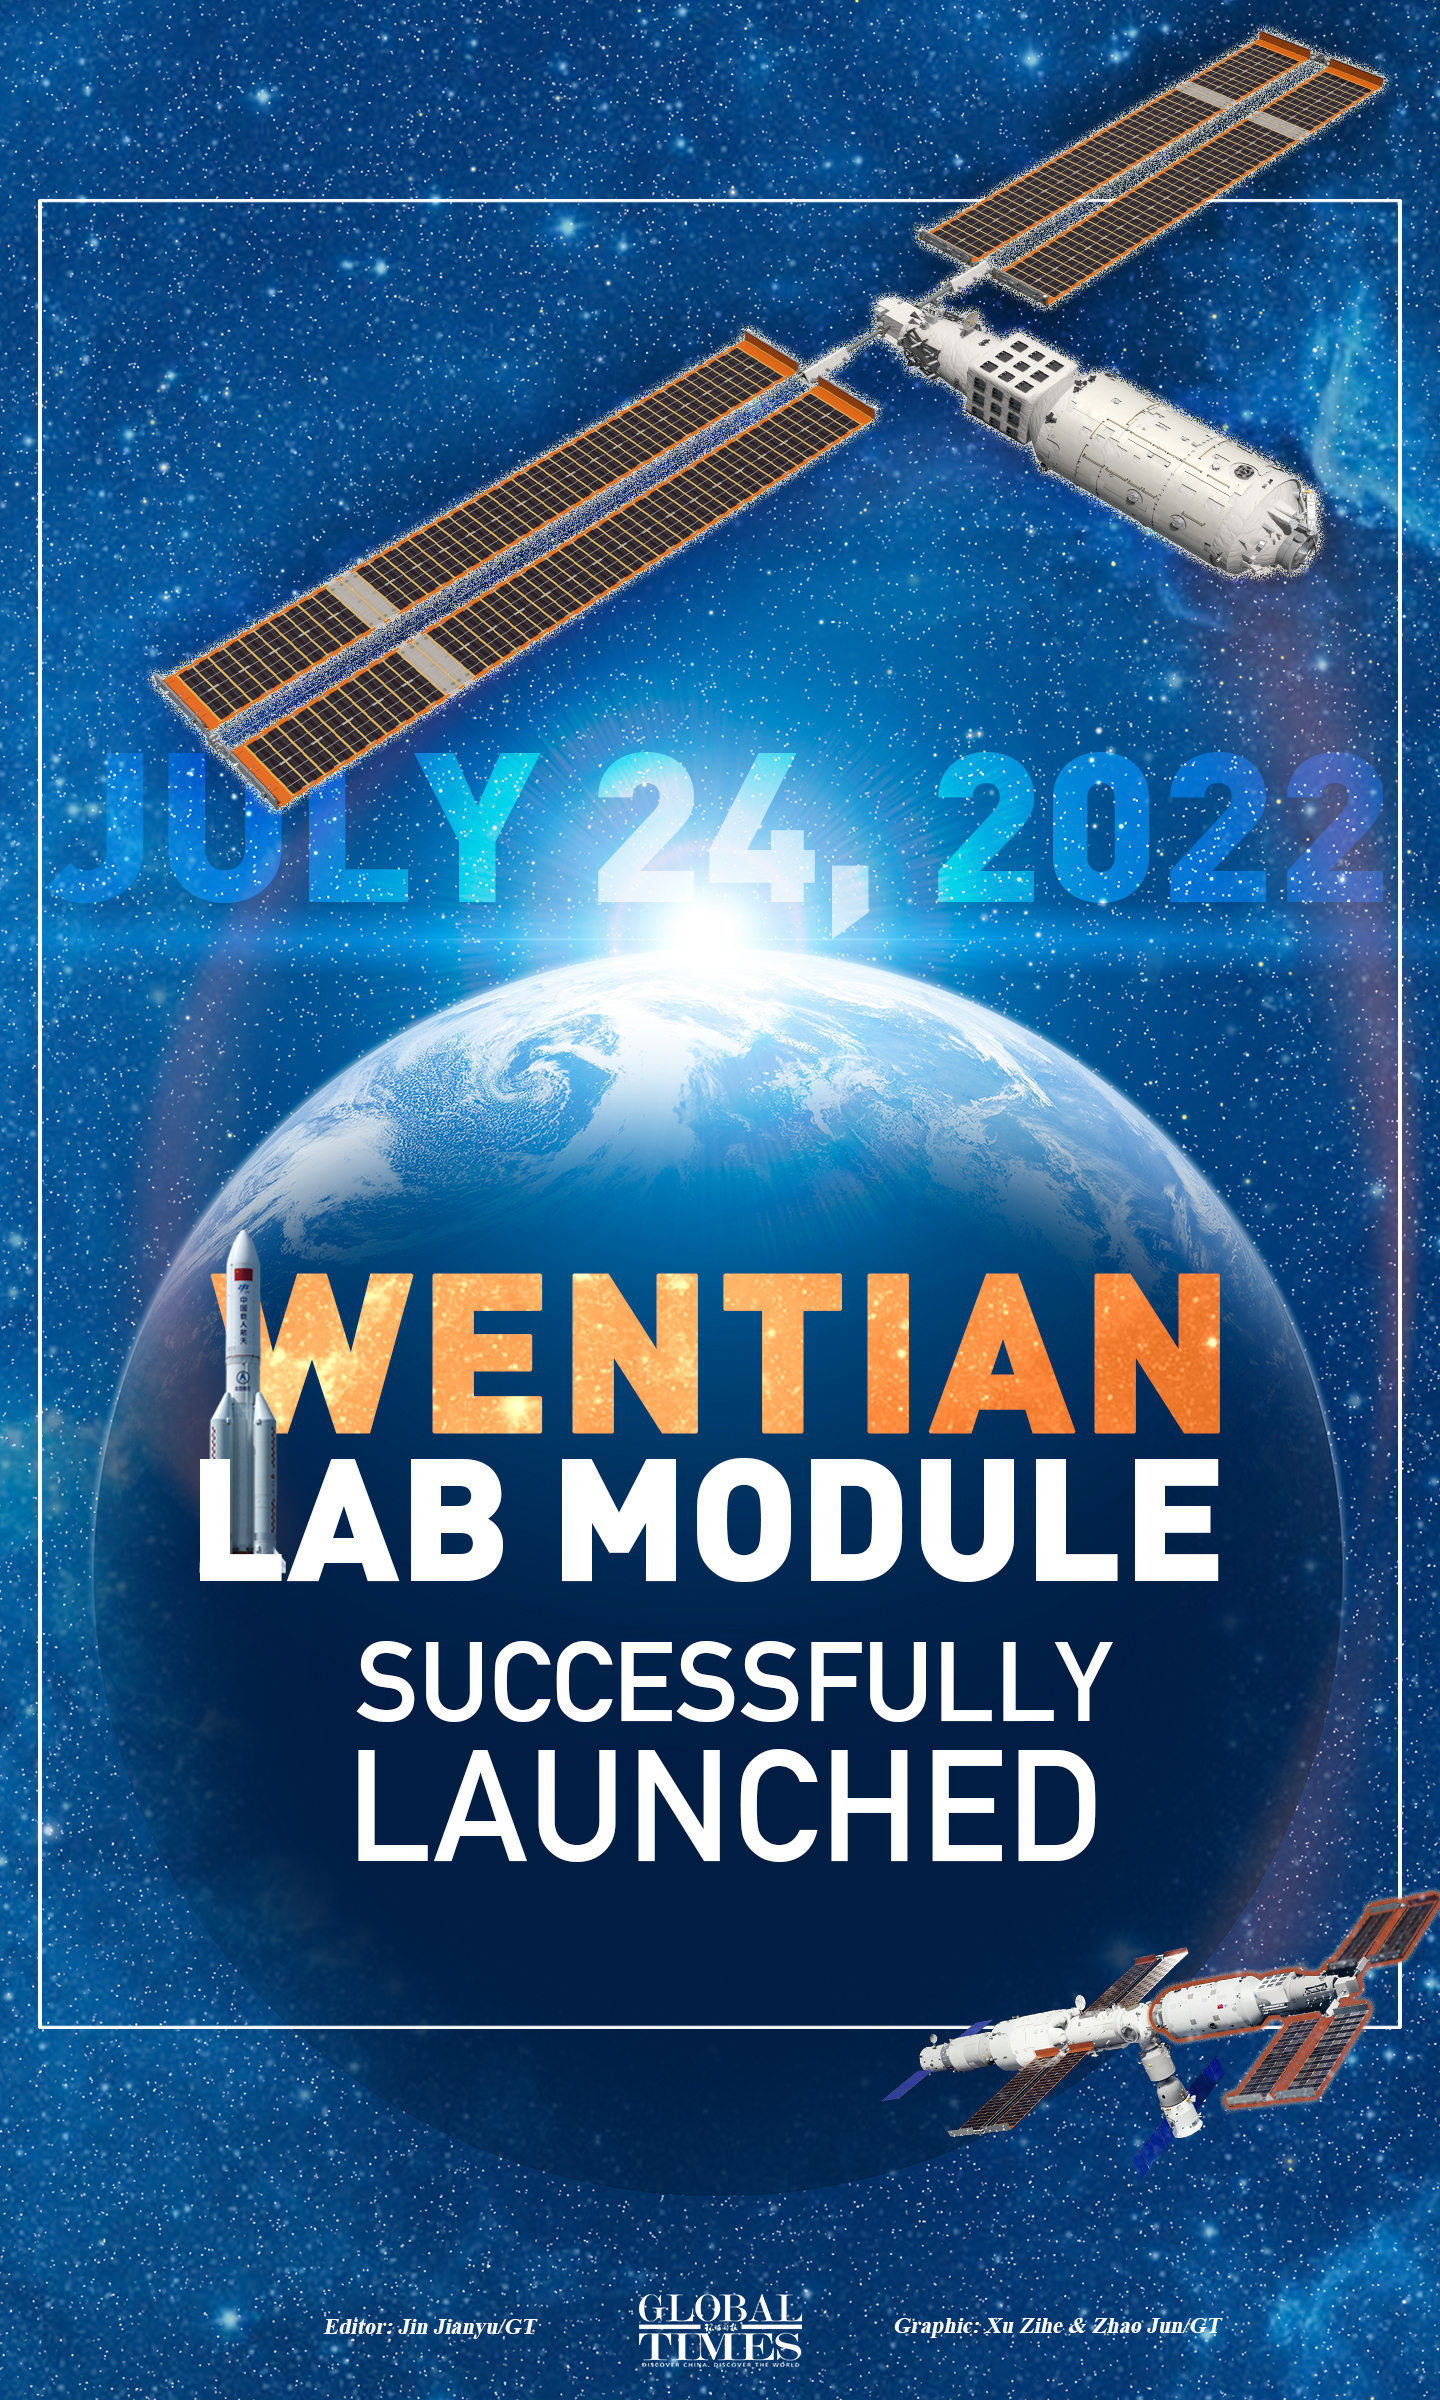 Wentian lab module successfully launched. Graphic: GT